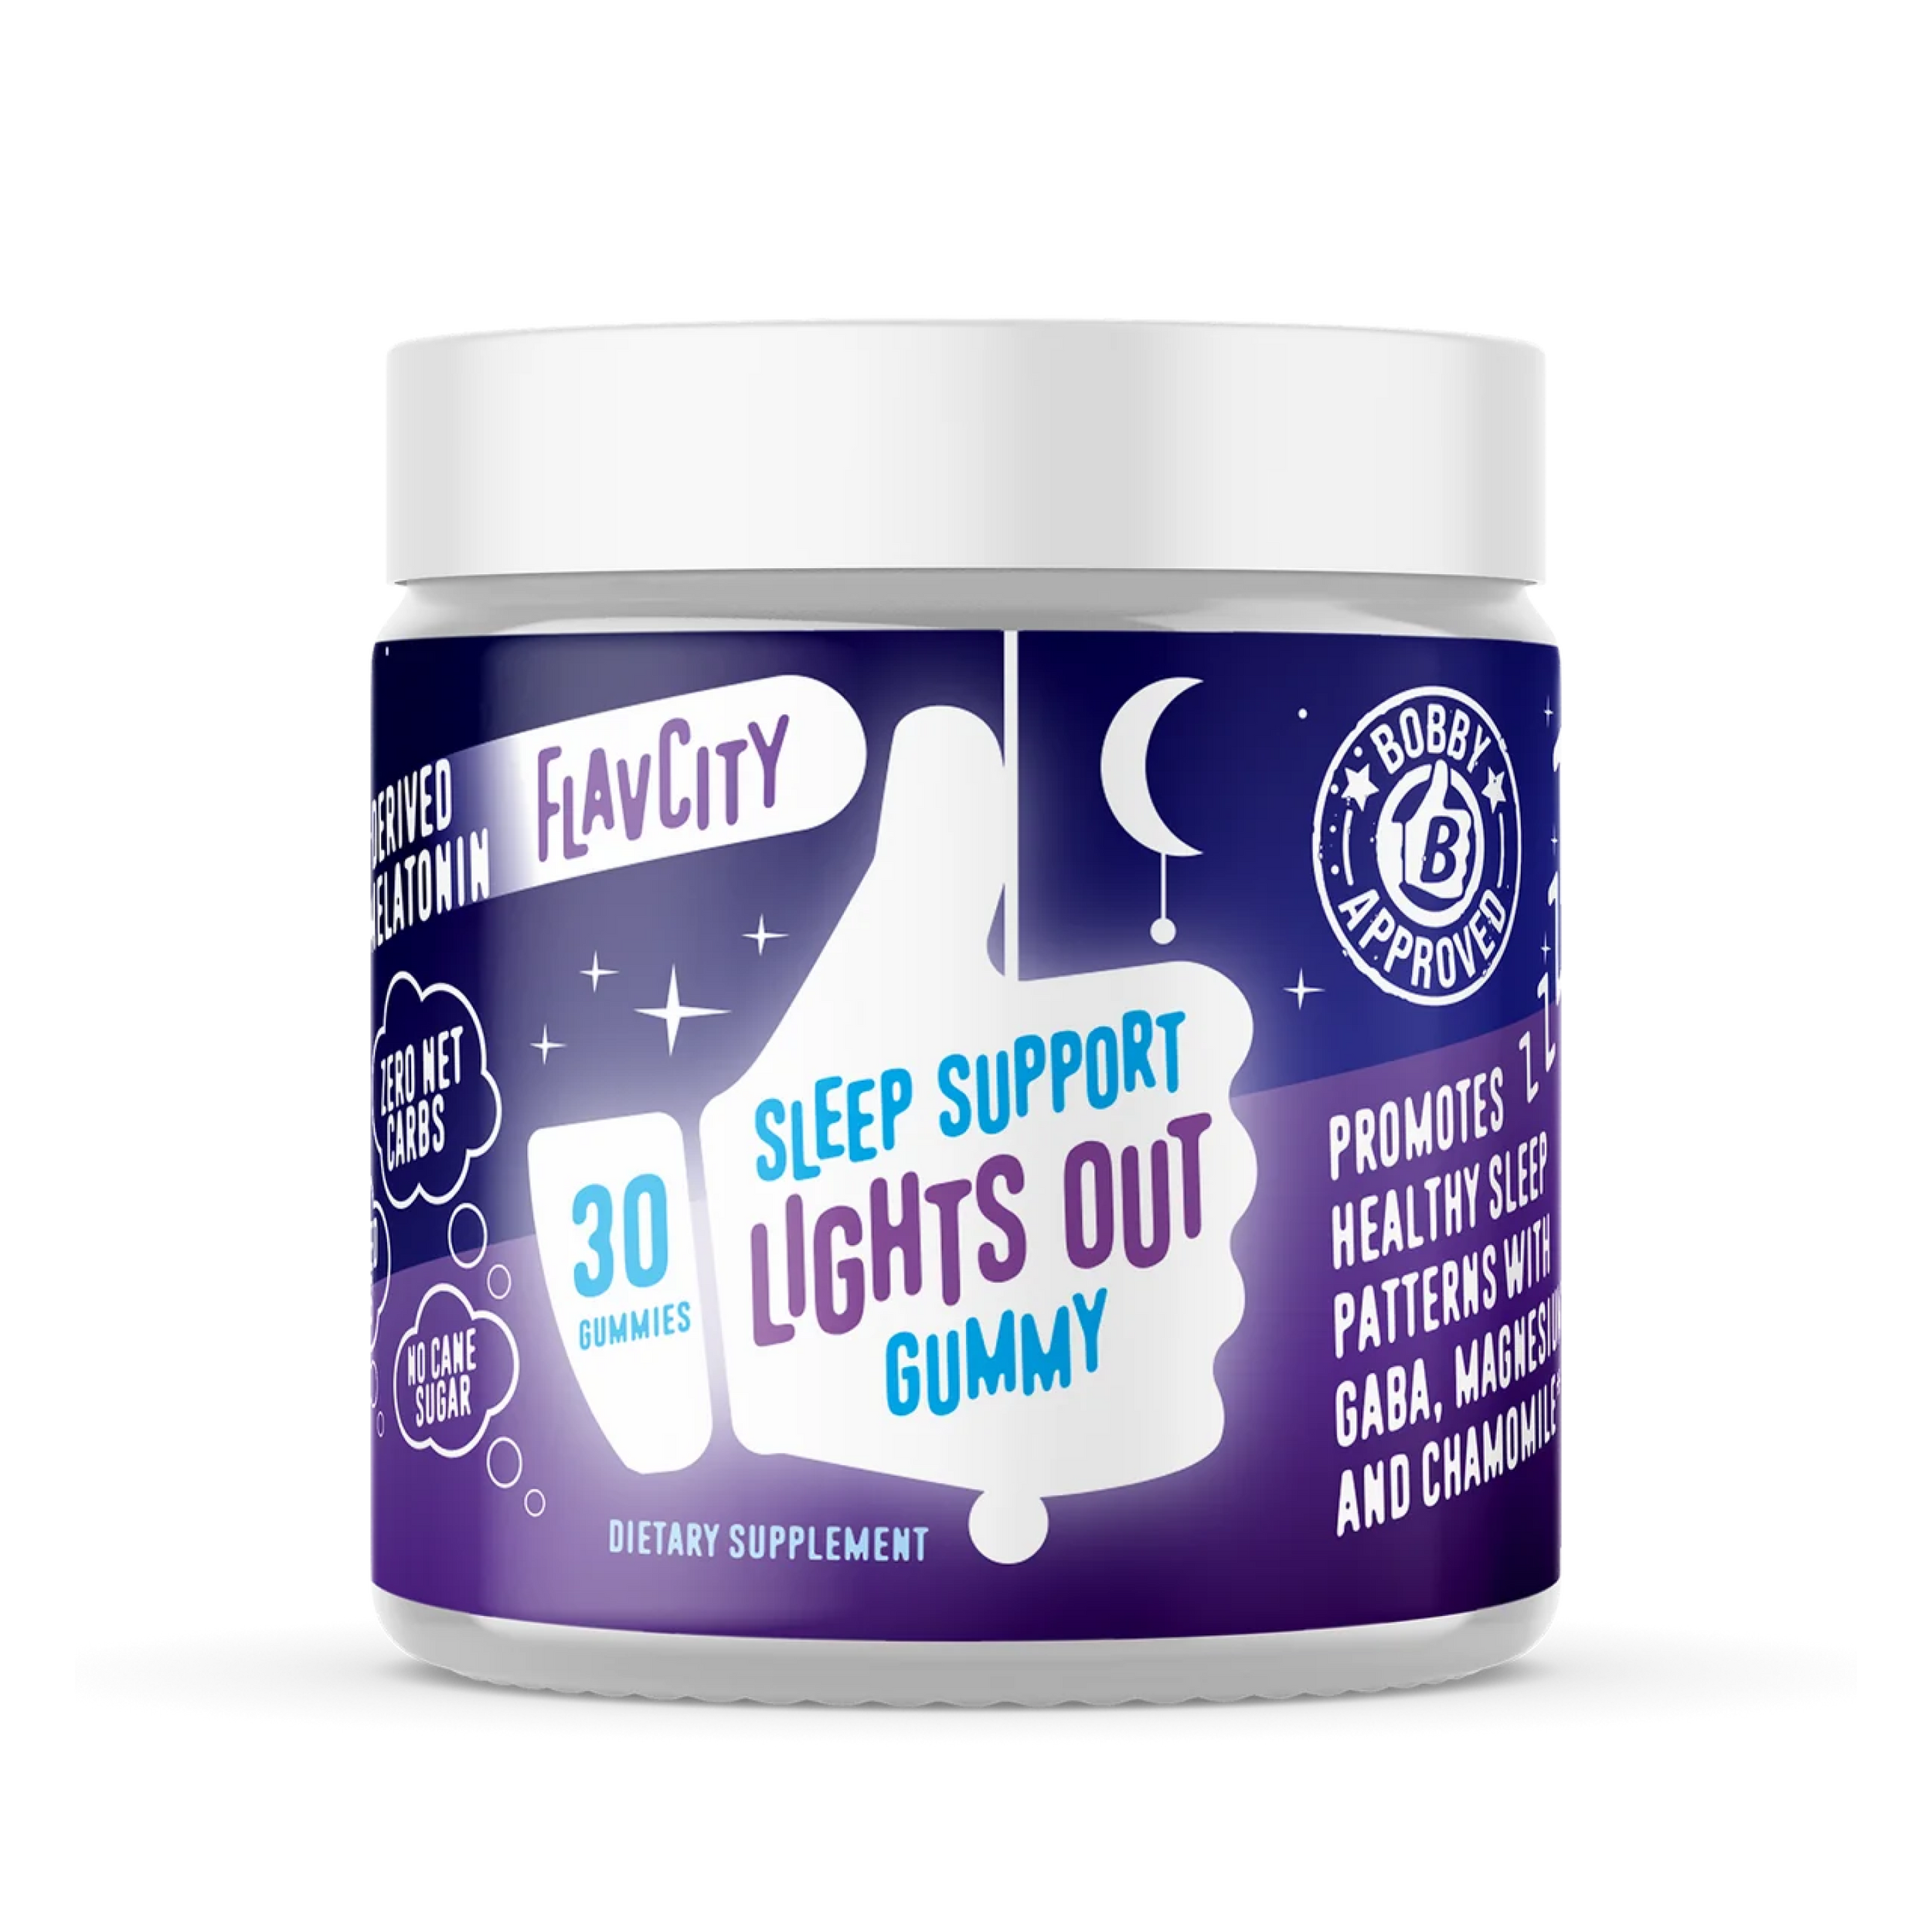 Lights Out Sleep Support Gummy